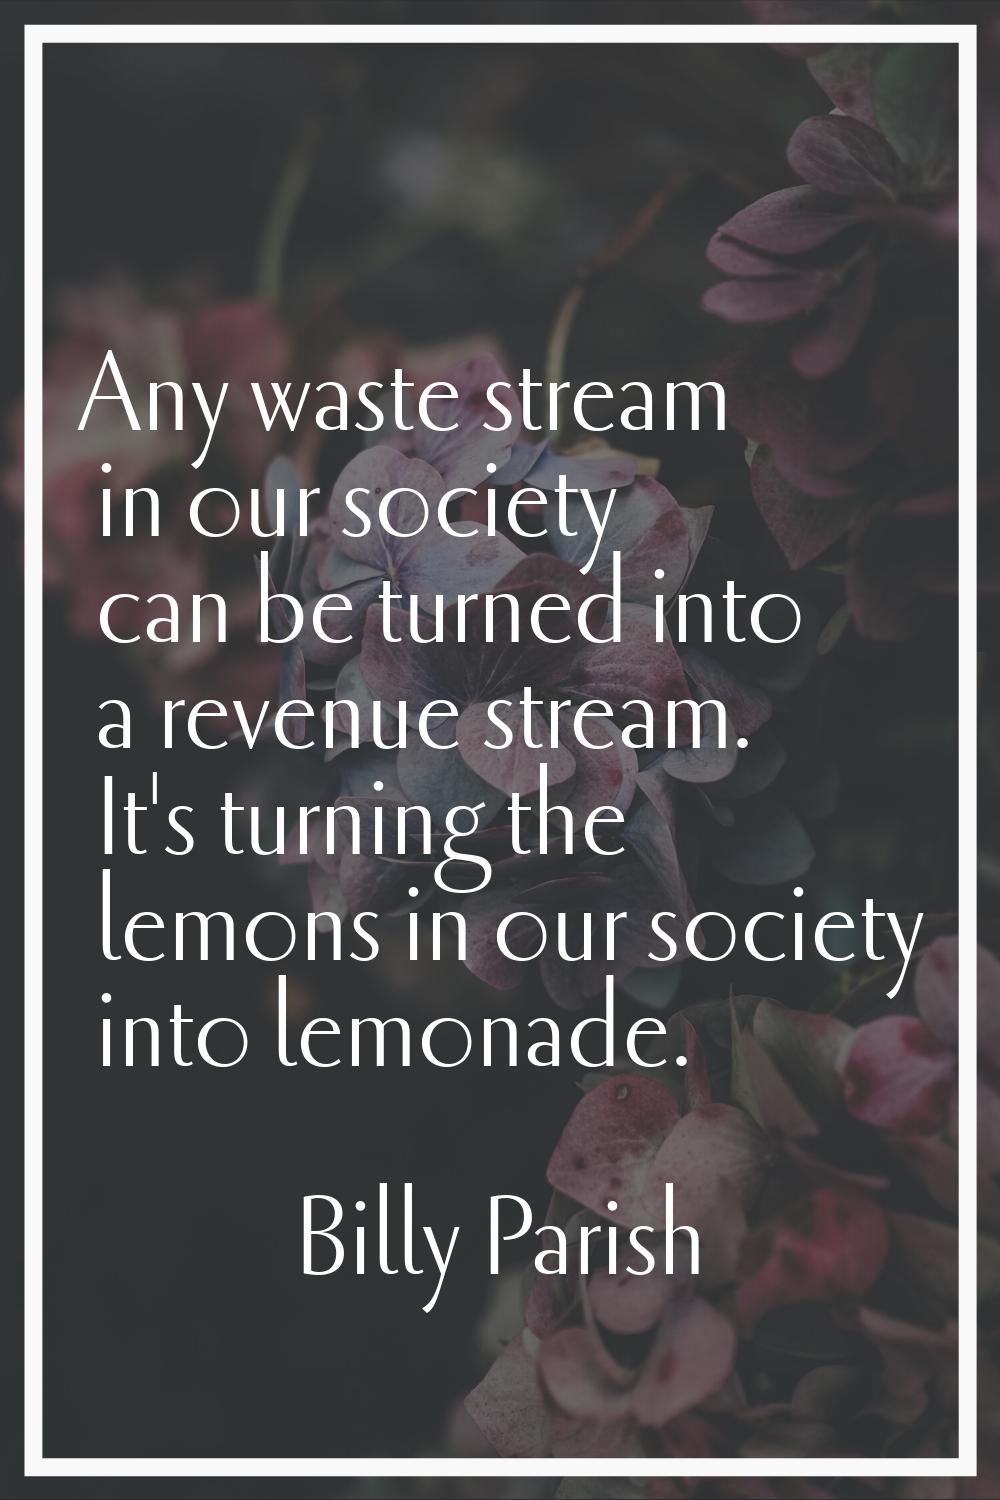 Any waste stream in our society can be turned into a revenue stream. It's turning the lemons in our